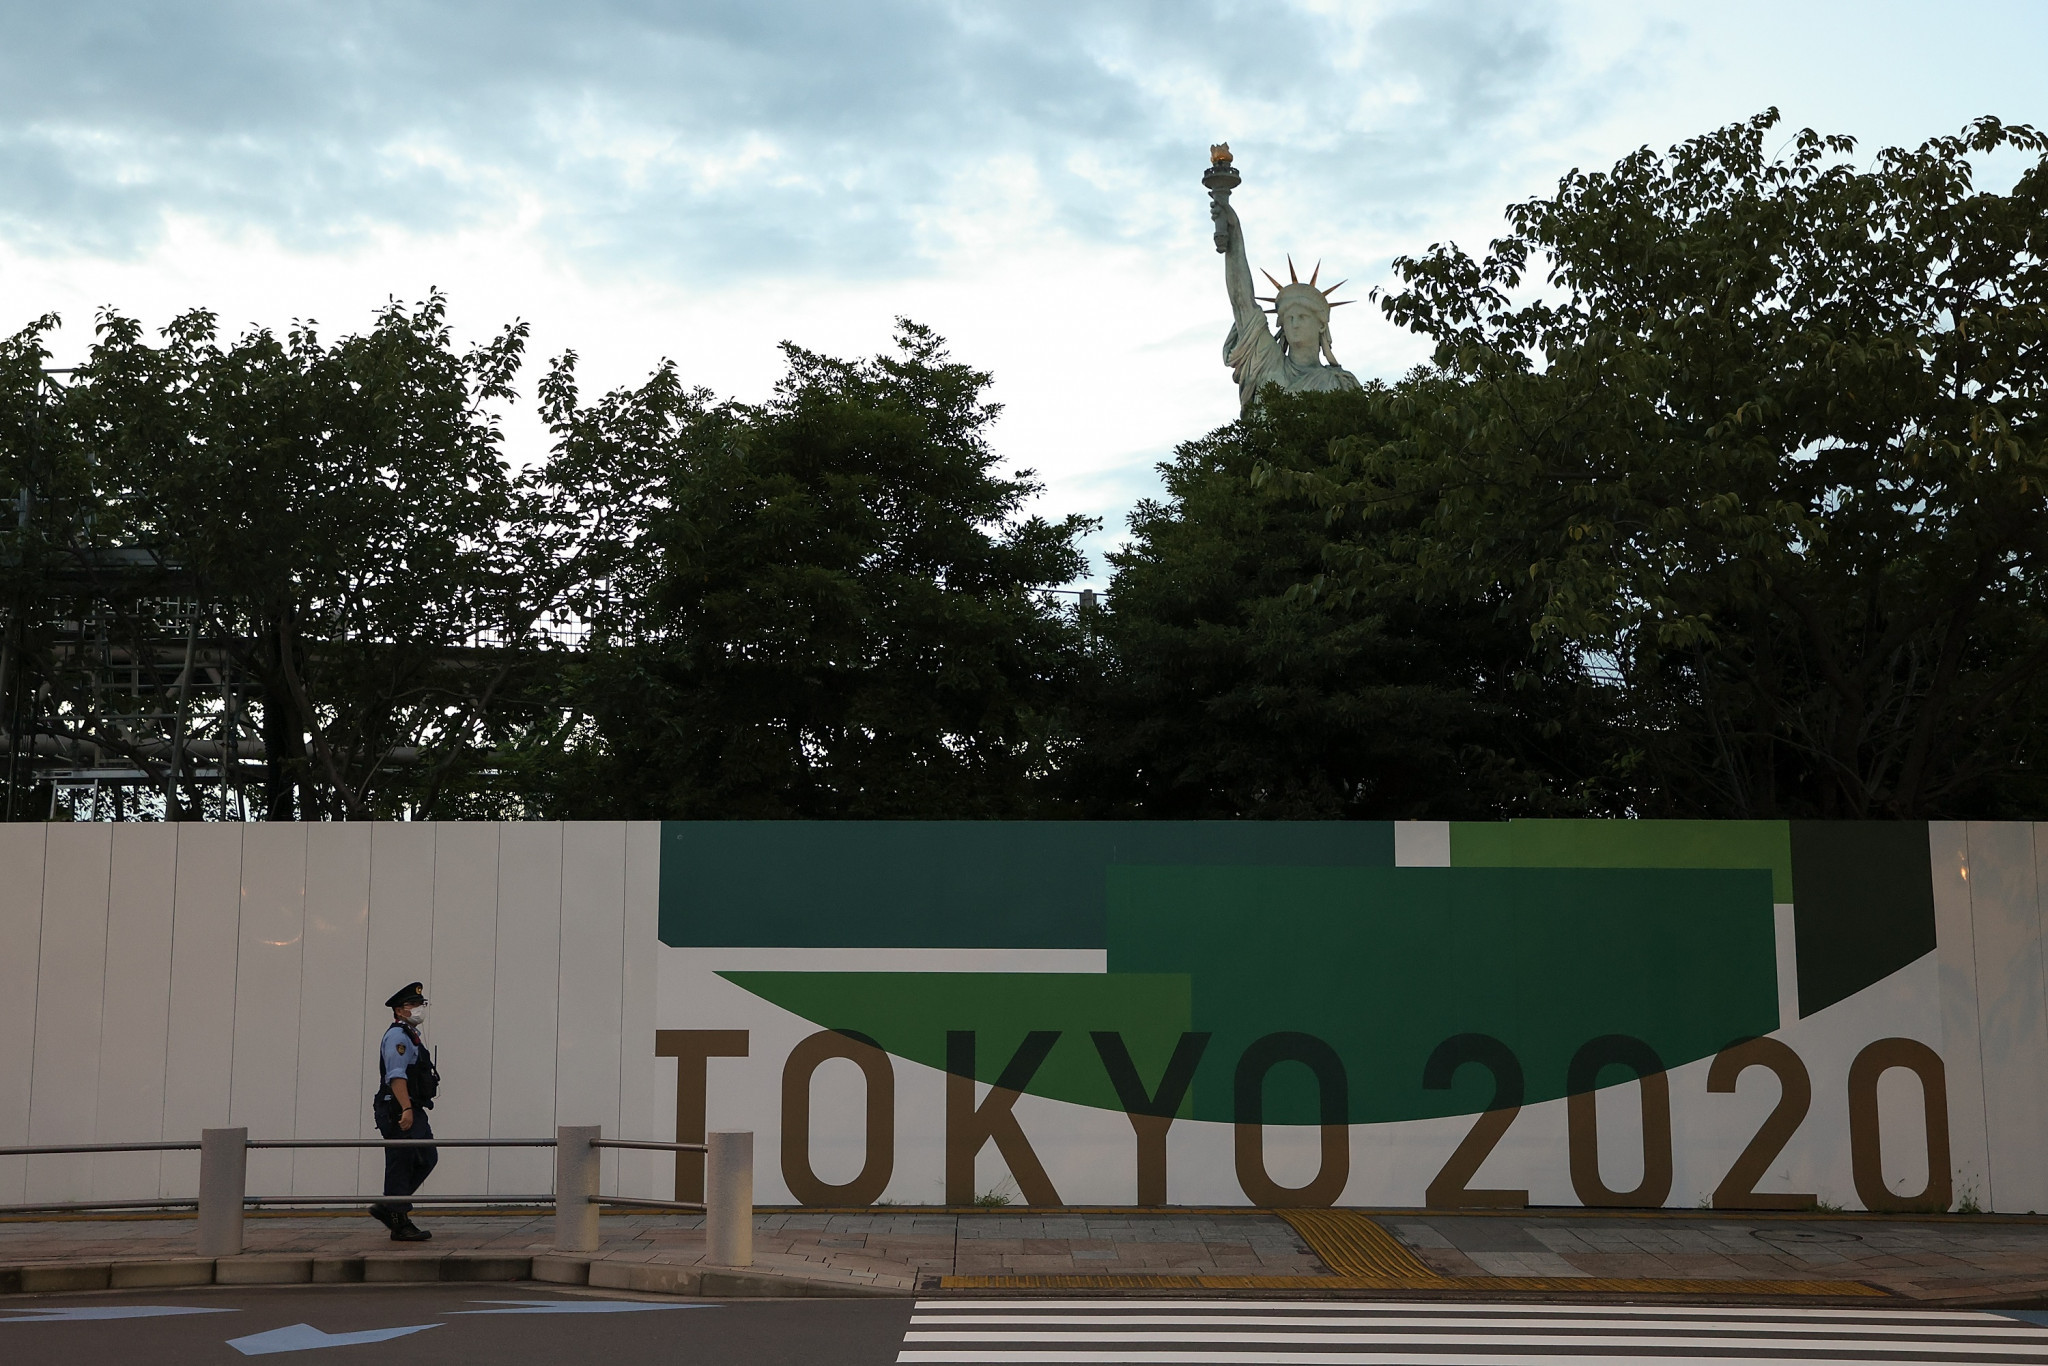 Two athletes test positive as Tokyo 2020 considers imposing more restrictions